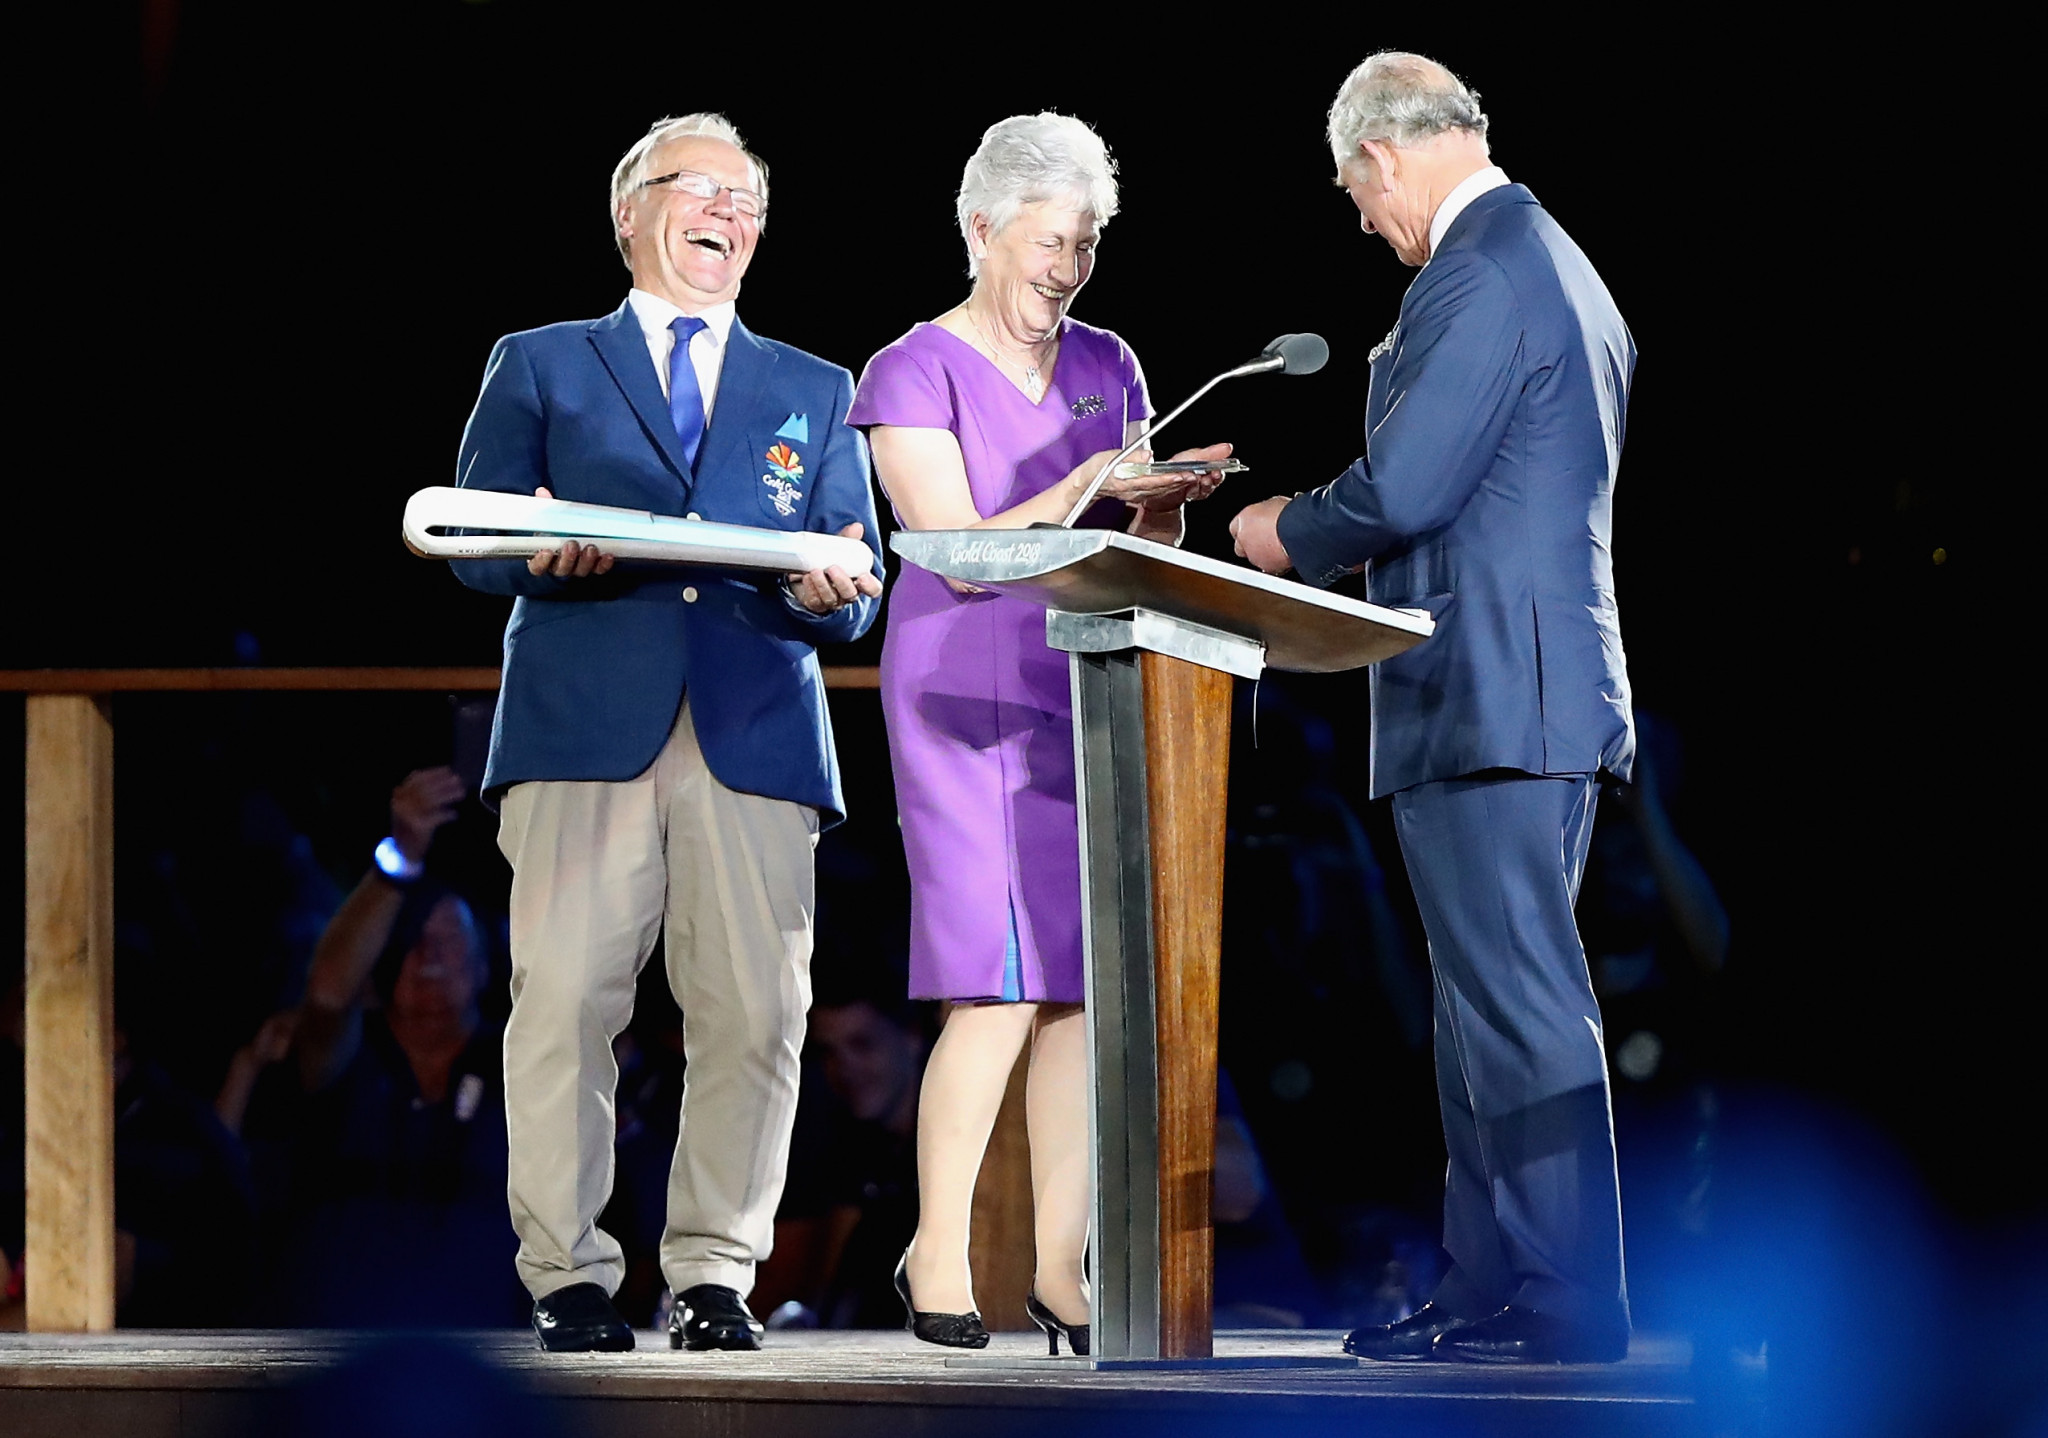 CGF President Louise Martin struggled to open the Baton before she passed it to Prince Charles ©Getty Images